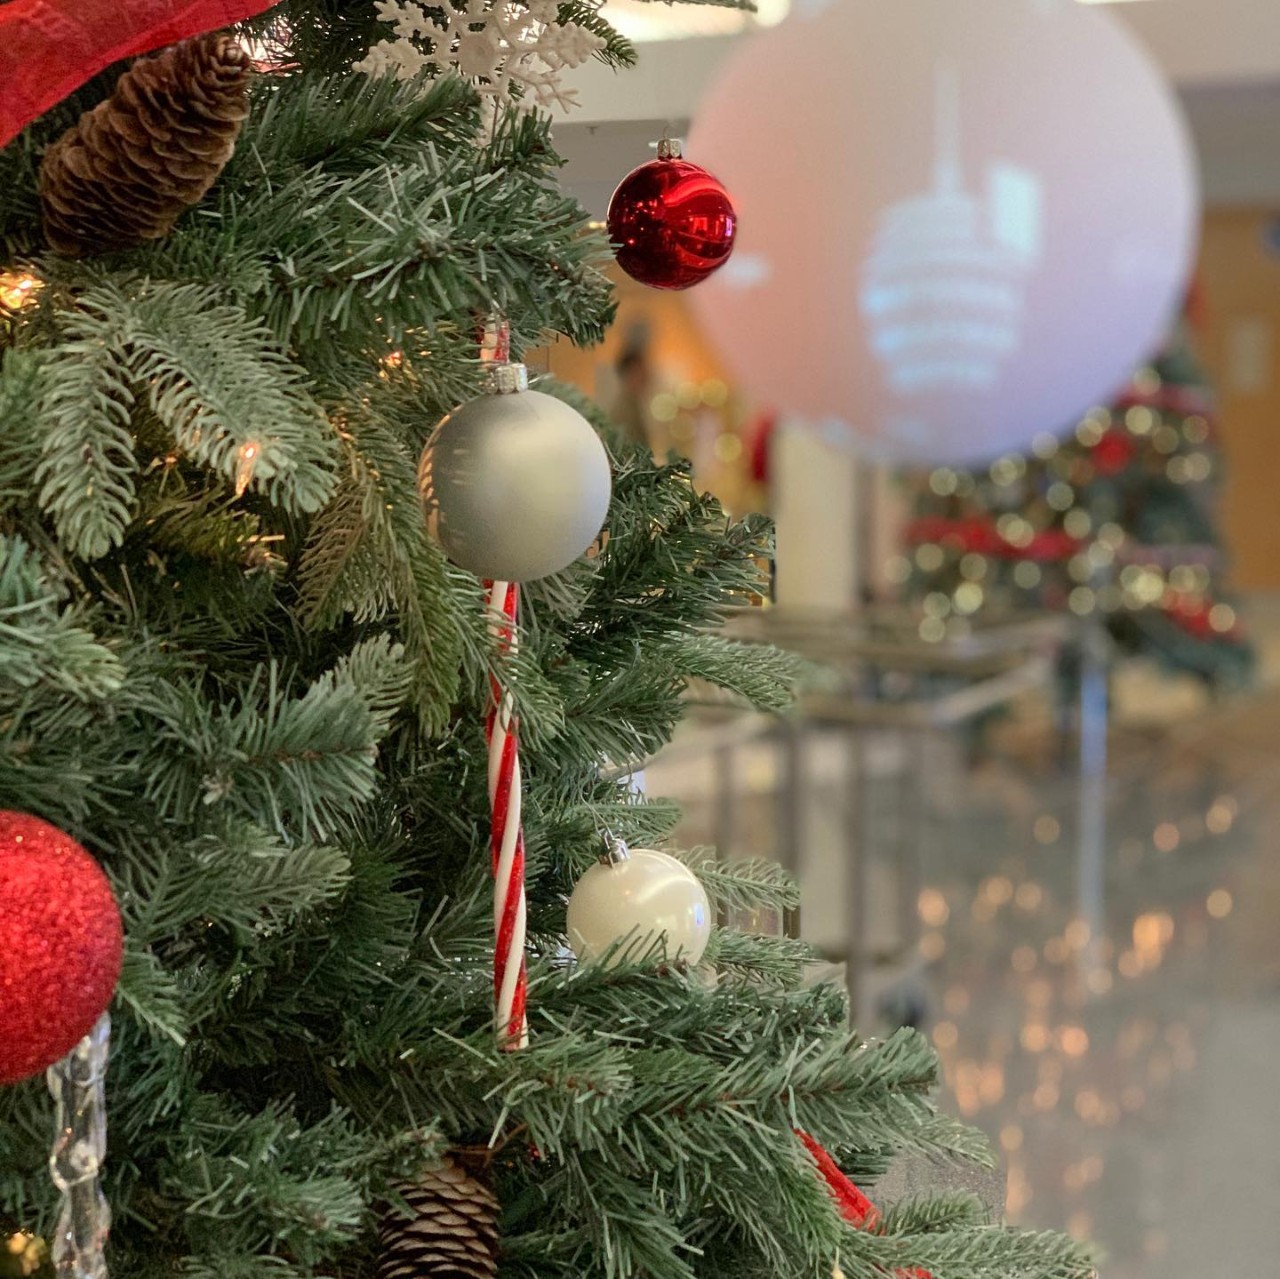 The NWC Atrium is decorated for the holidays. The NWC logo can be seen on Science on a Sphere. National Weather Center.